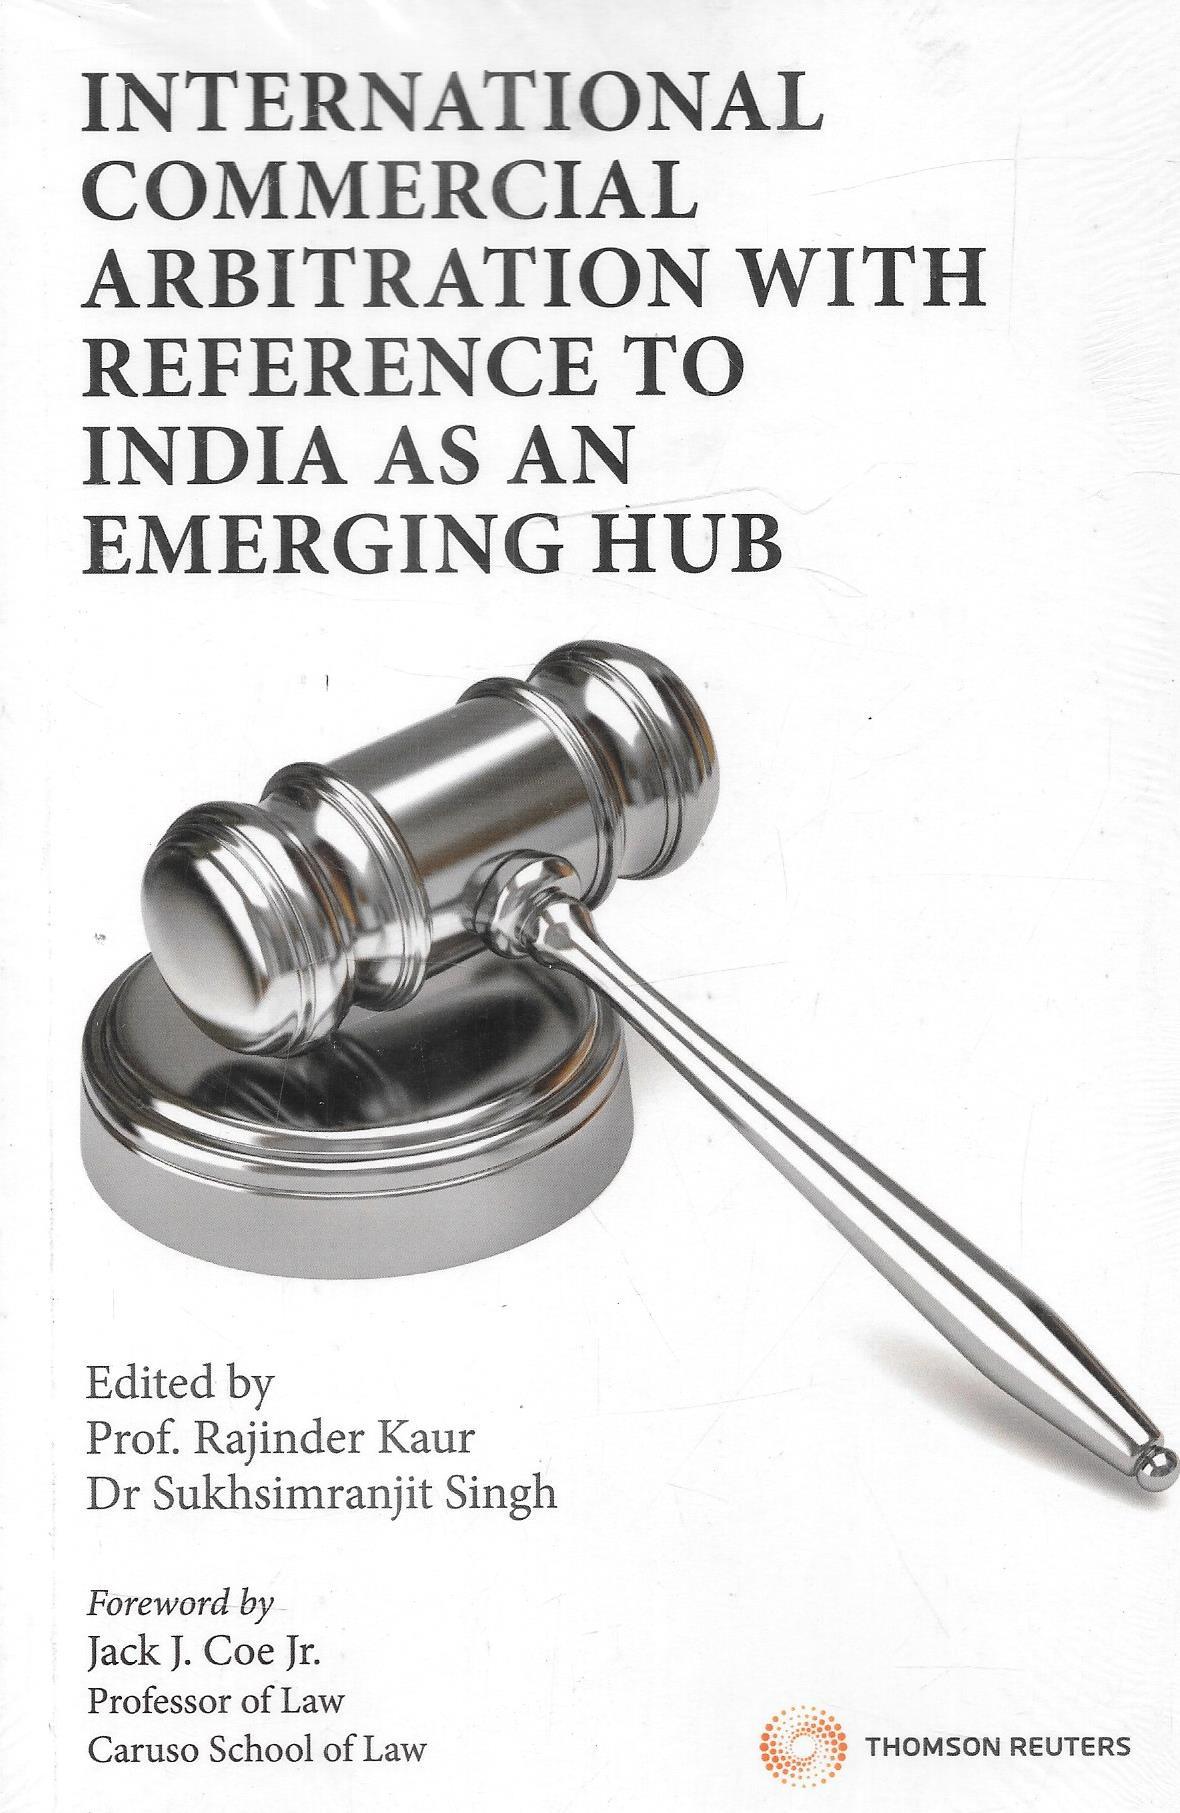 International Commercial Arbitration With Reference To India As An Emerging Hub